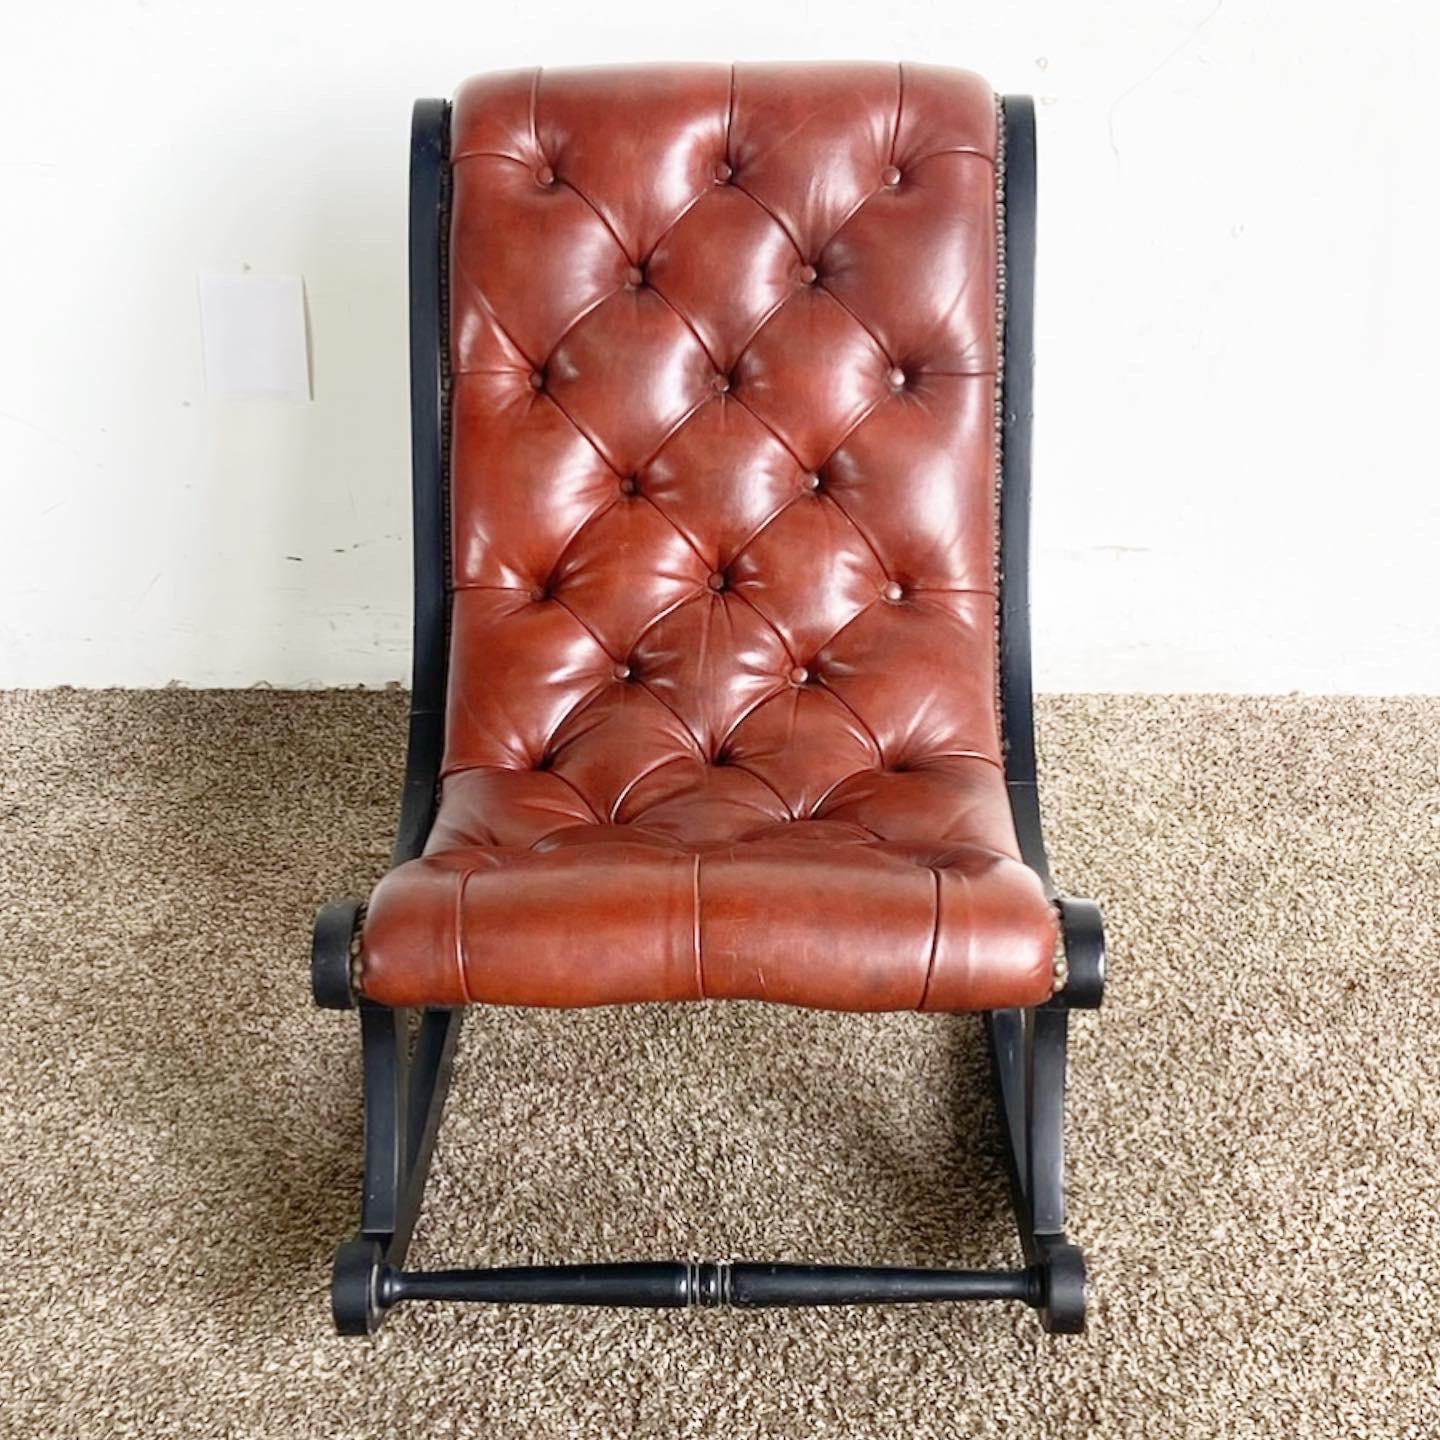 Experience timeless luxury with our Regency Tufted Leather Rocking Chair, a classic piece offering refined elegance and optimal comfort.

Features a sumptuous brown leather seat, richly tufted for an elegant and comfortable design.
Contrasting black